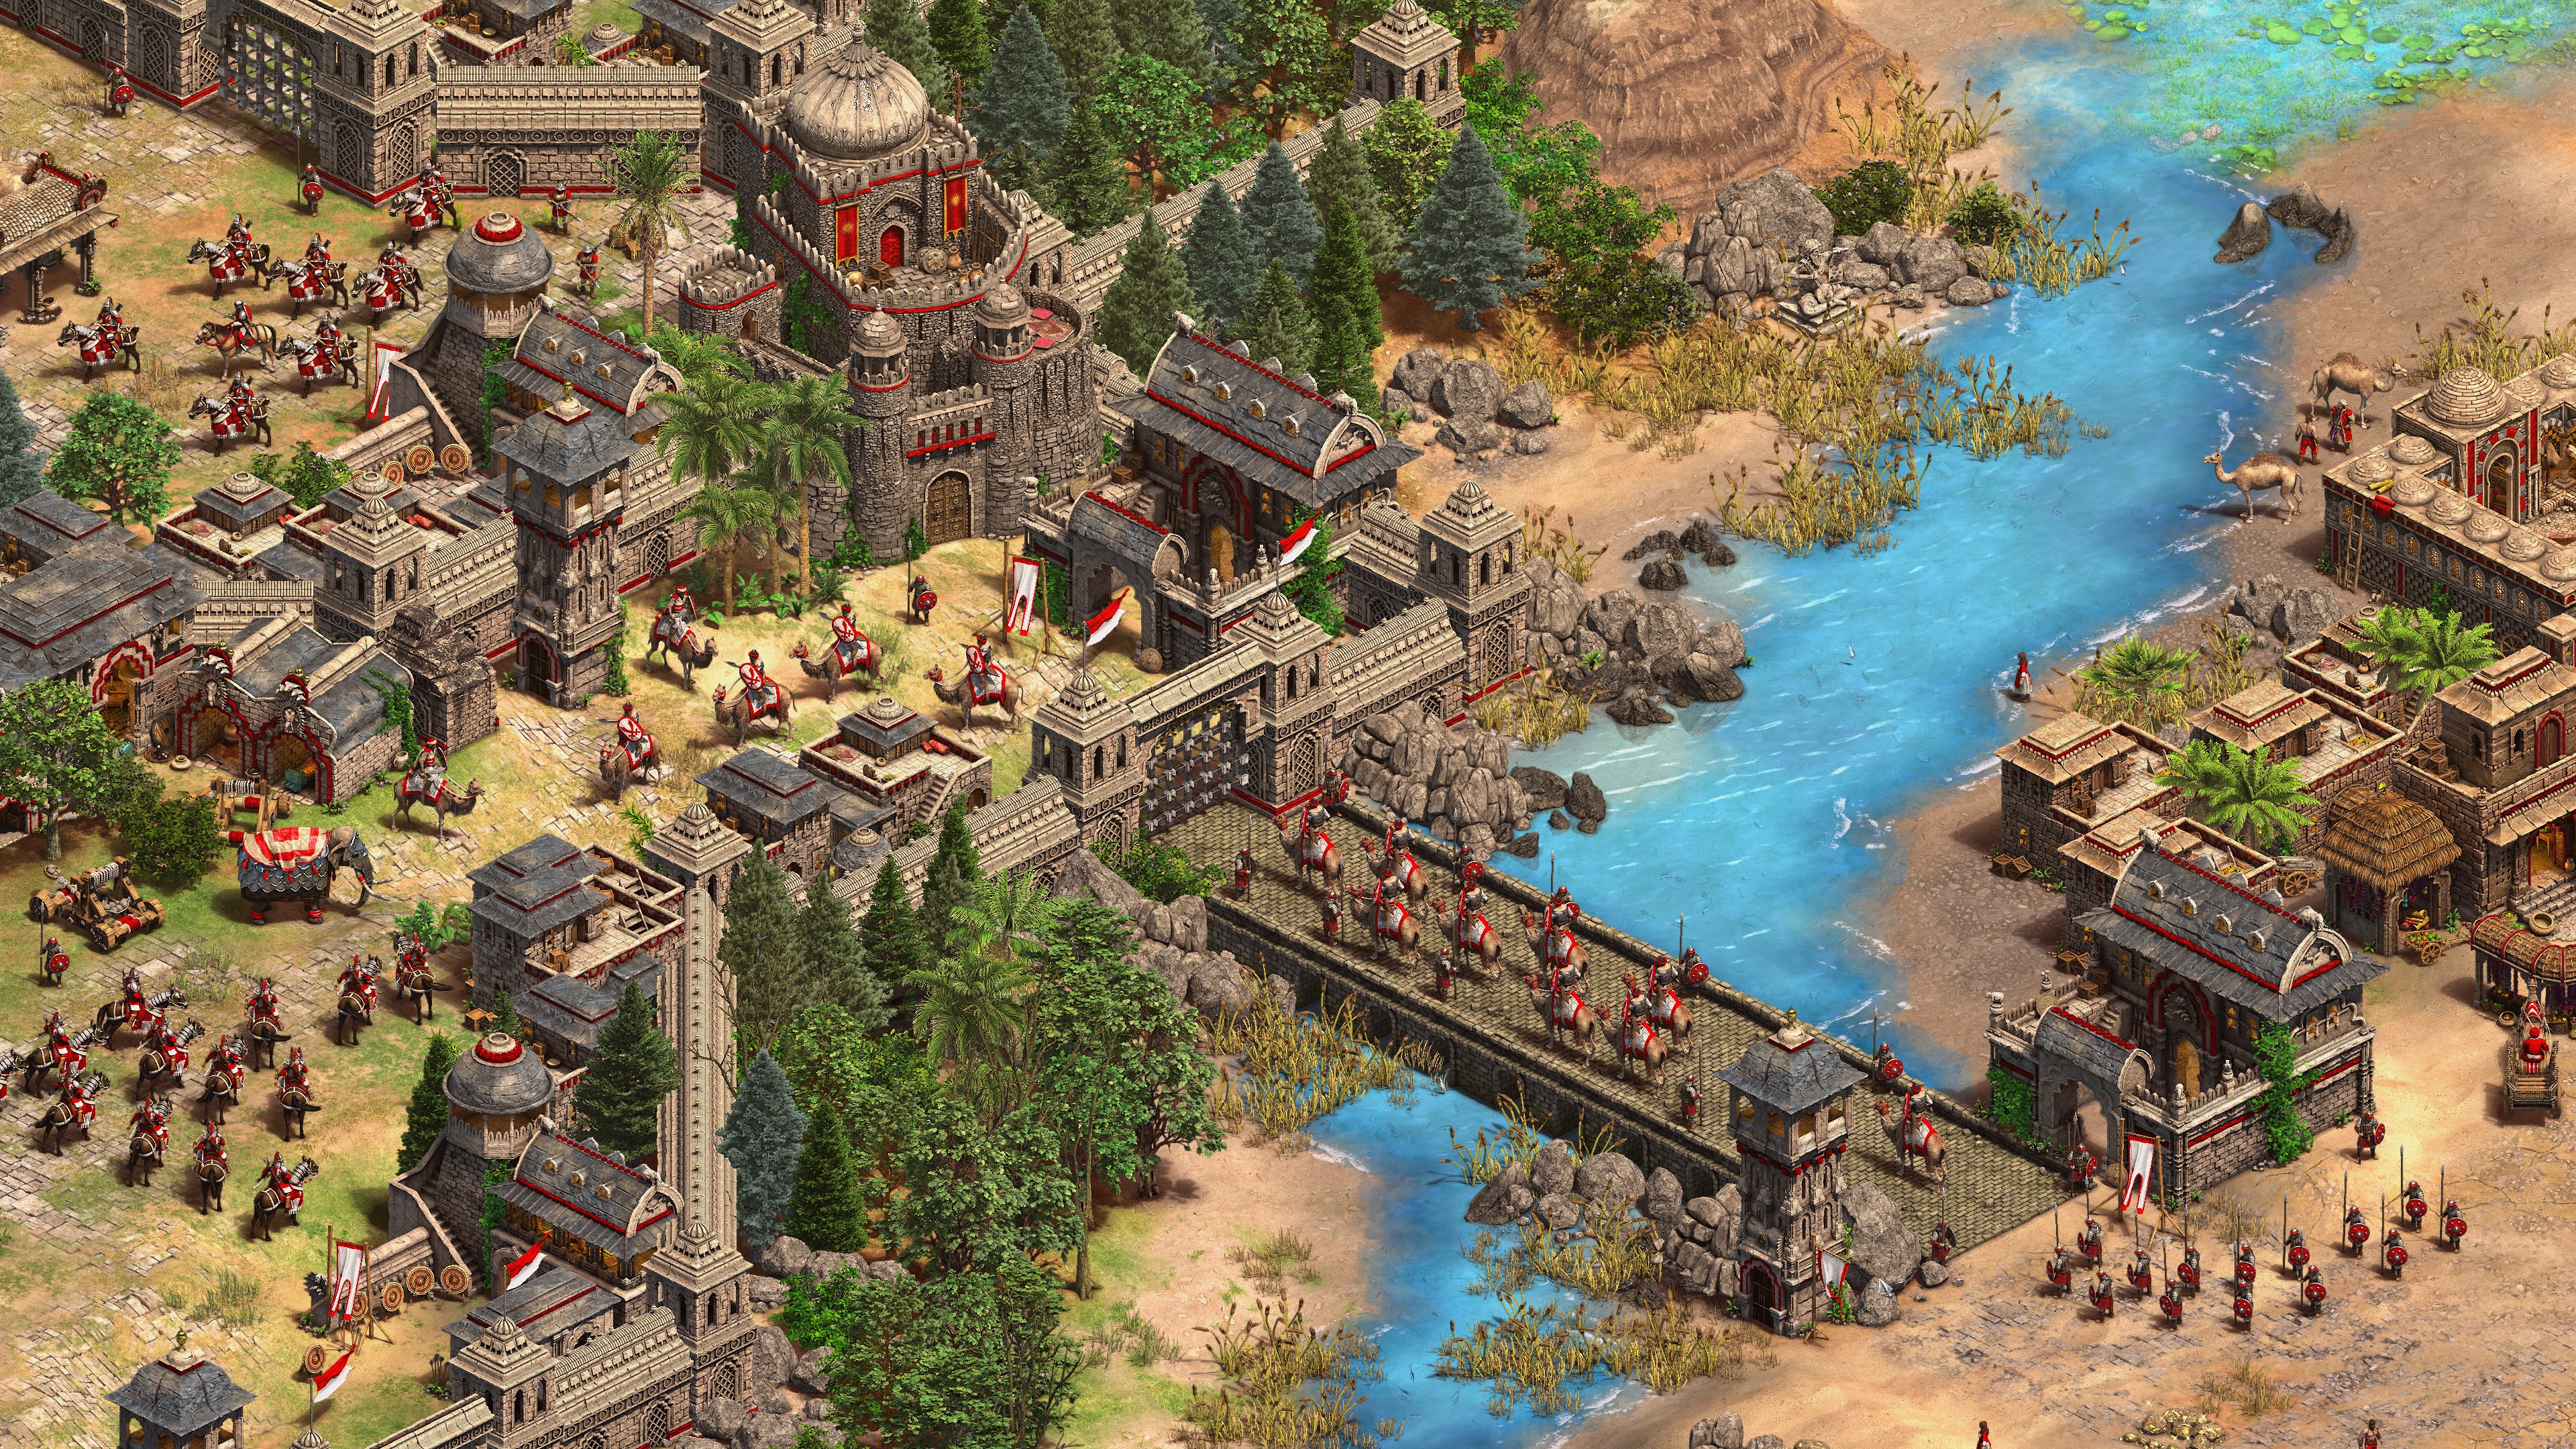 Age of Empires II: Definitive Edition - Dynasties of India screenshot 45686